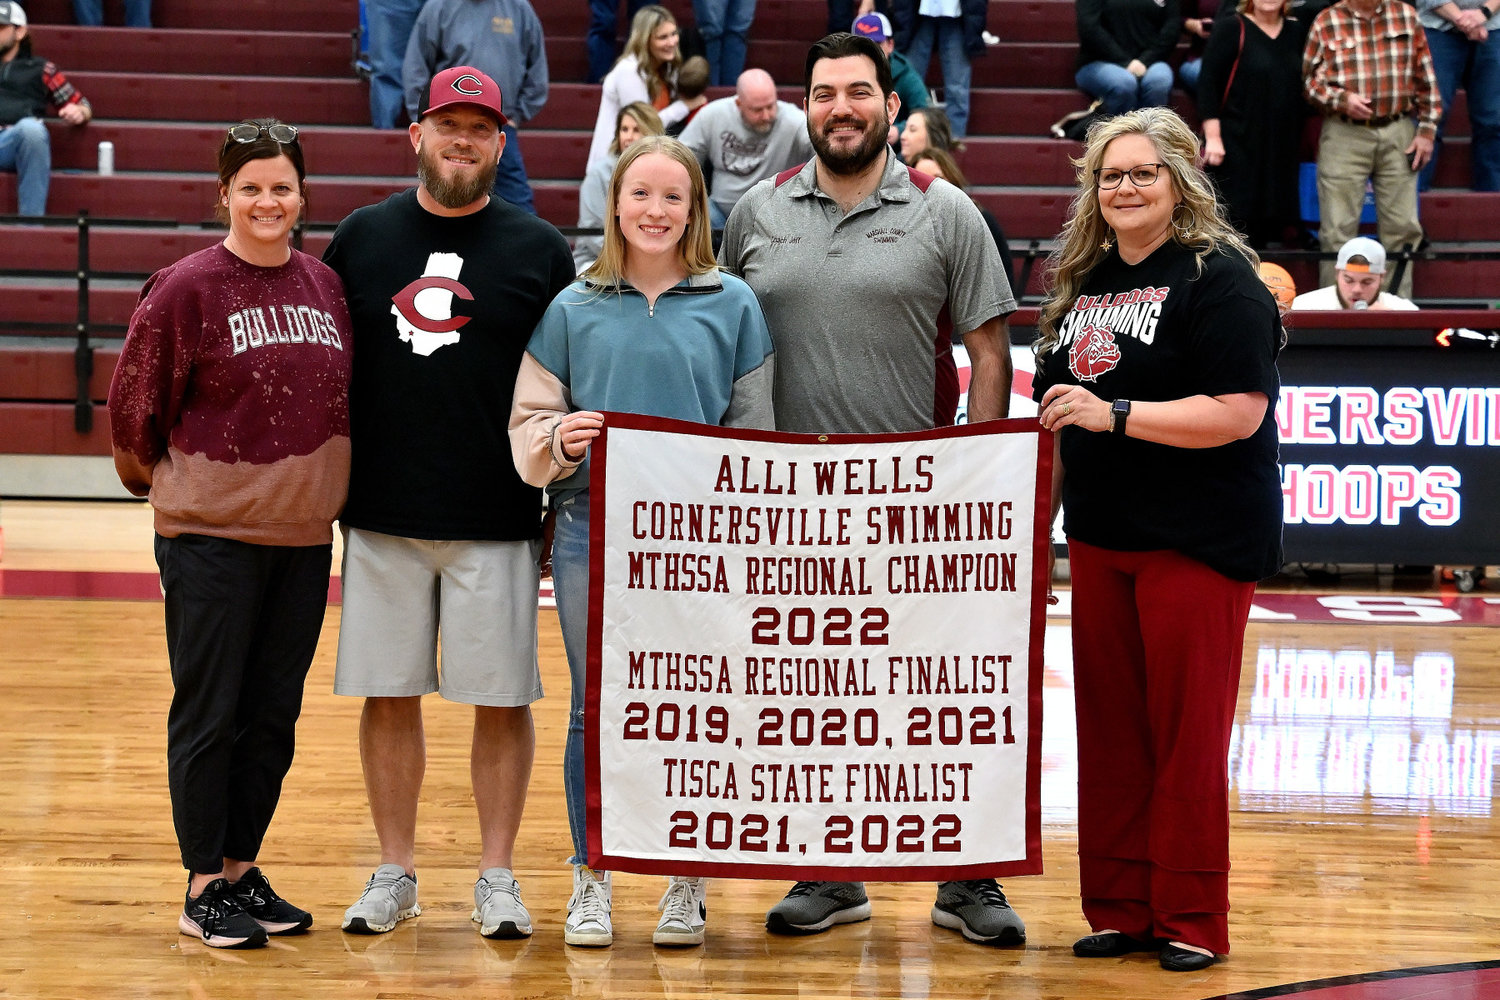 Wells, along with her family, is presented with a banner listing out her numerous accomplishments that will hang in the school’s gym.